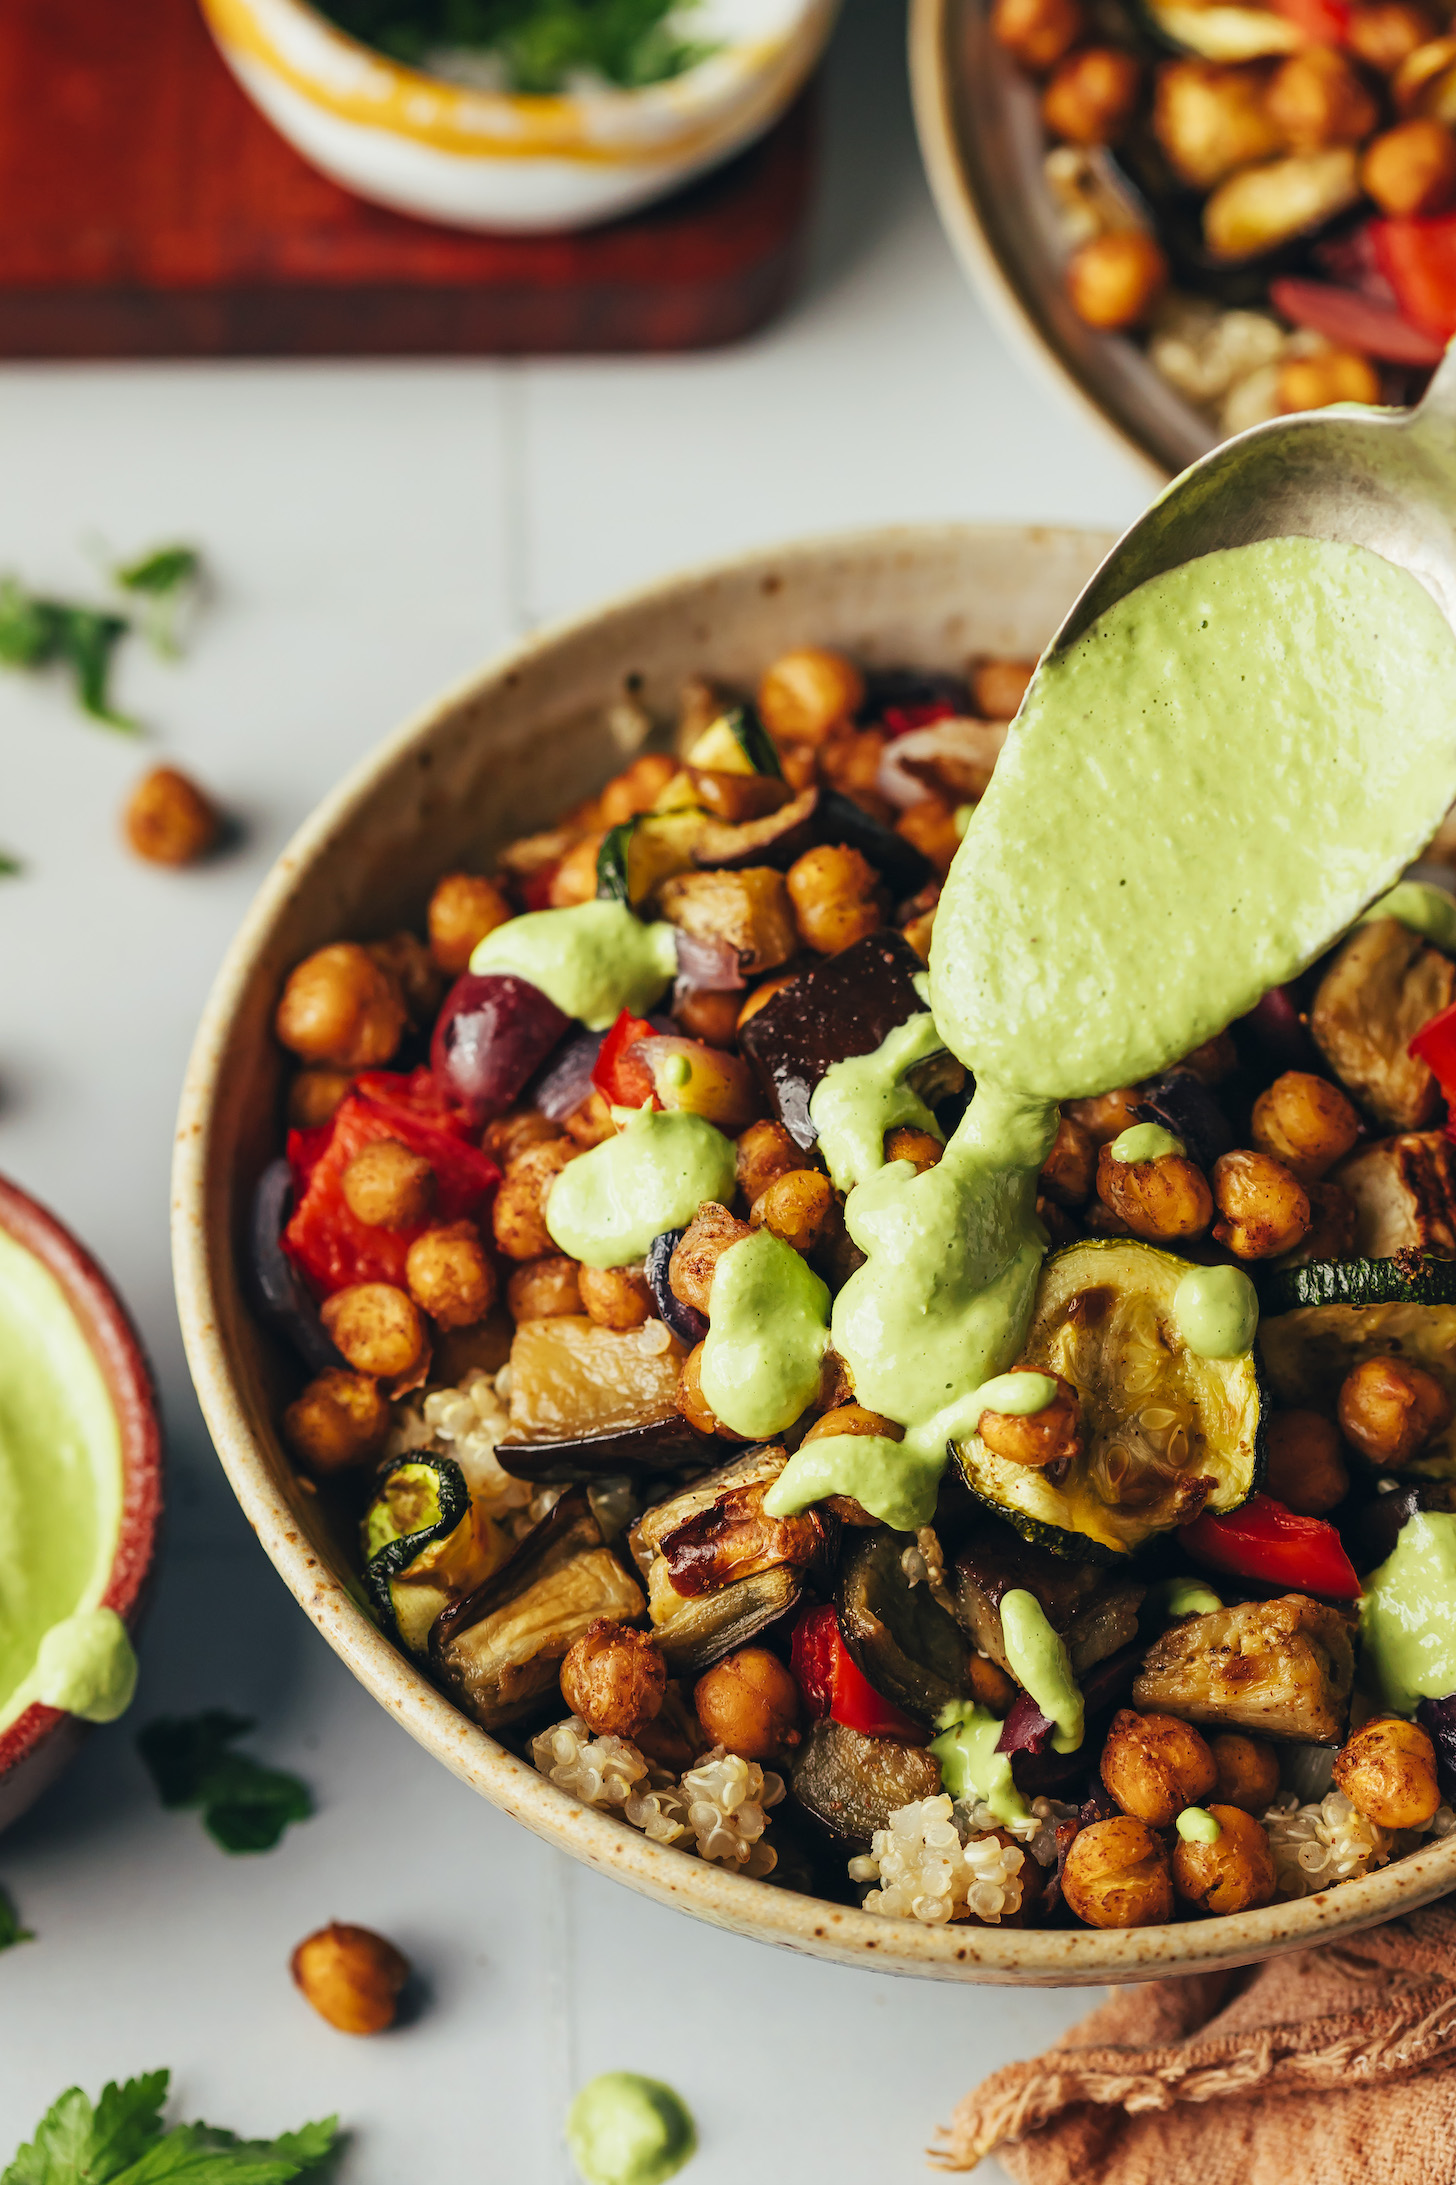 Roasted vegetables, chickpeas and quinoa bowl drizzled with green tahini sauce